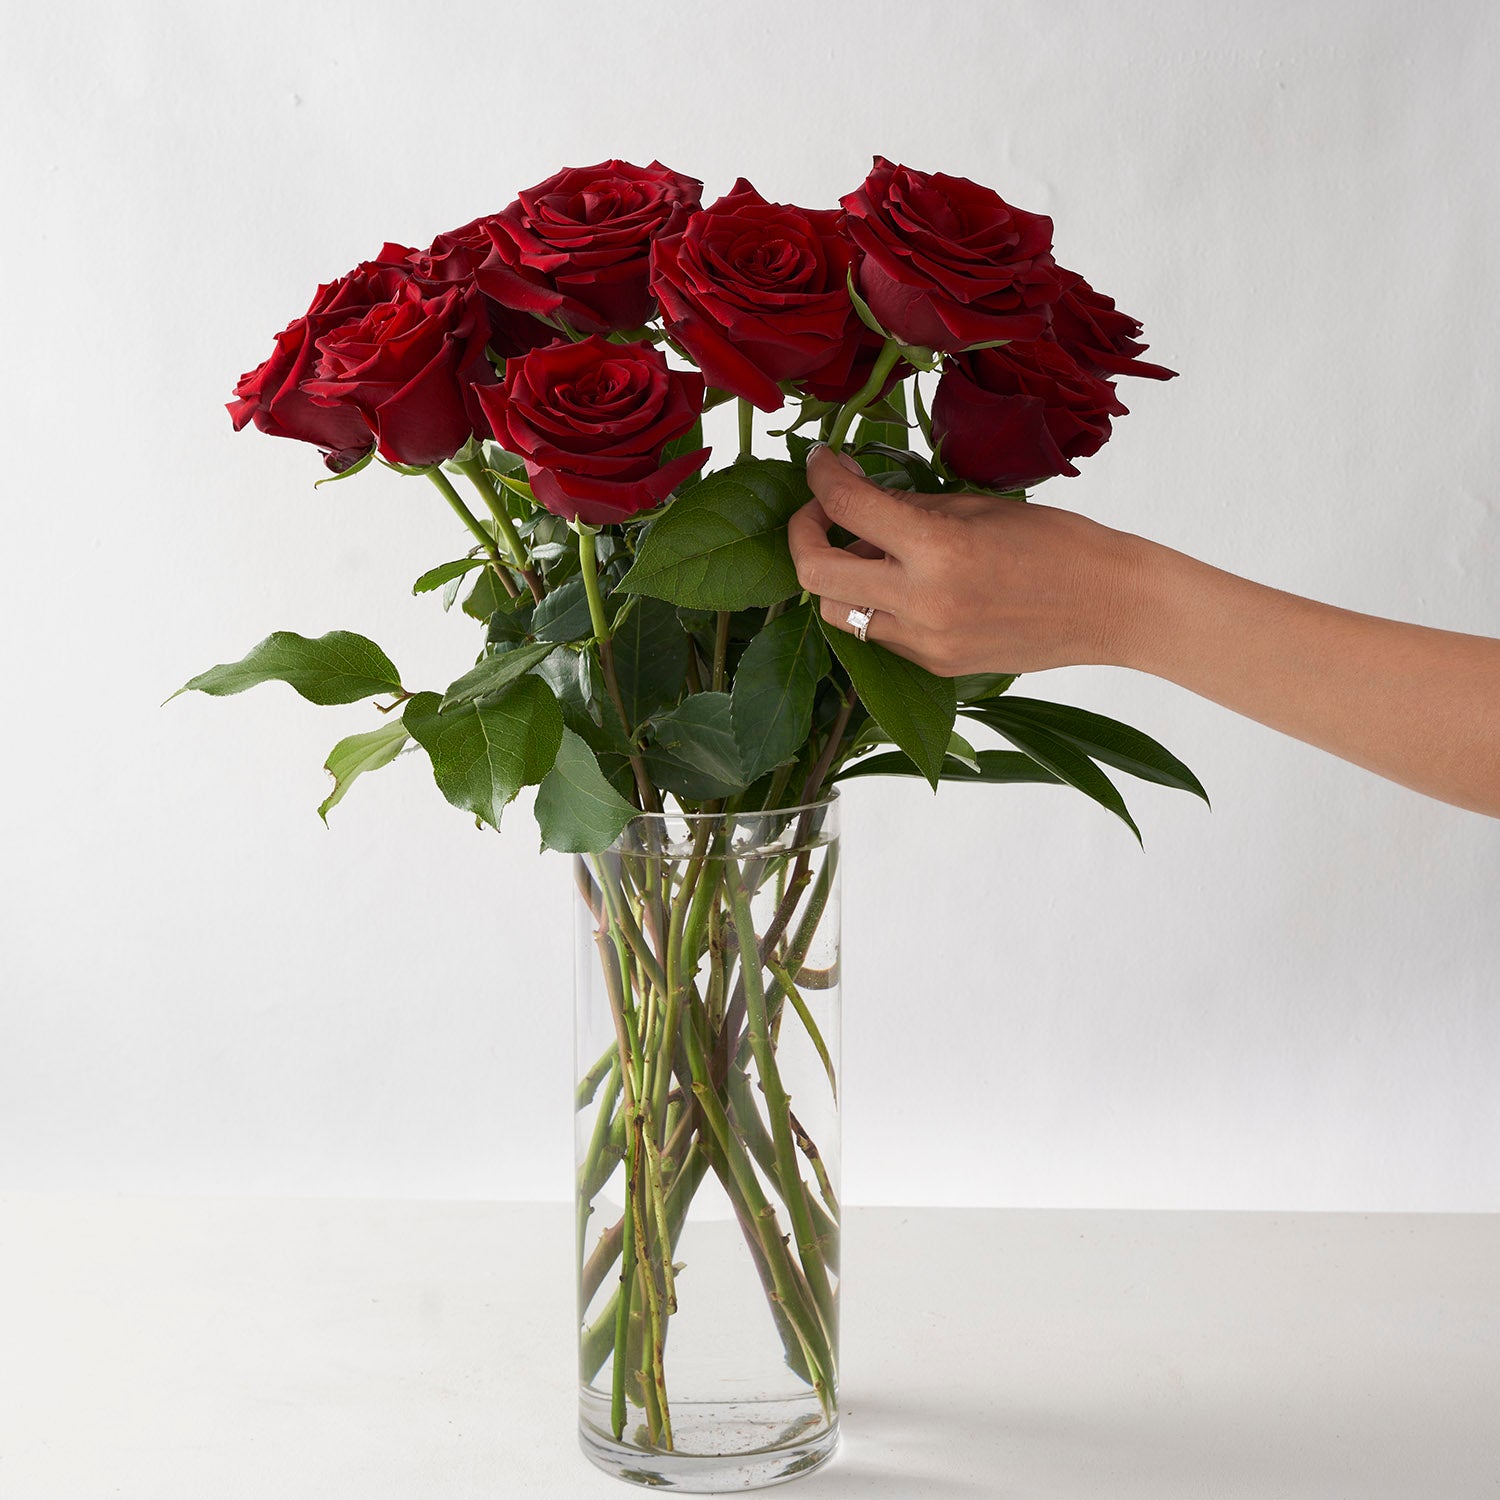 Woman's hand arranging twelve red roses in simple glass vase.+